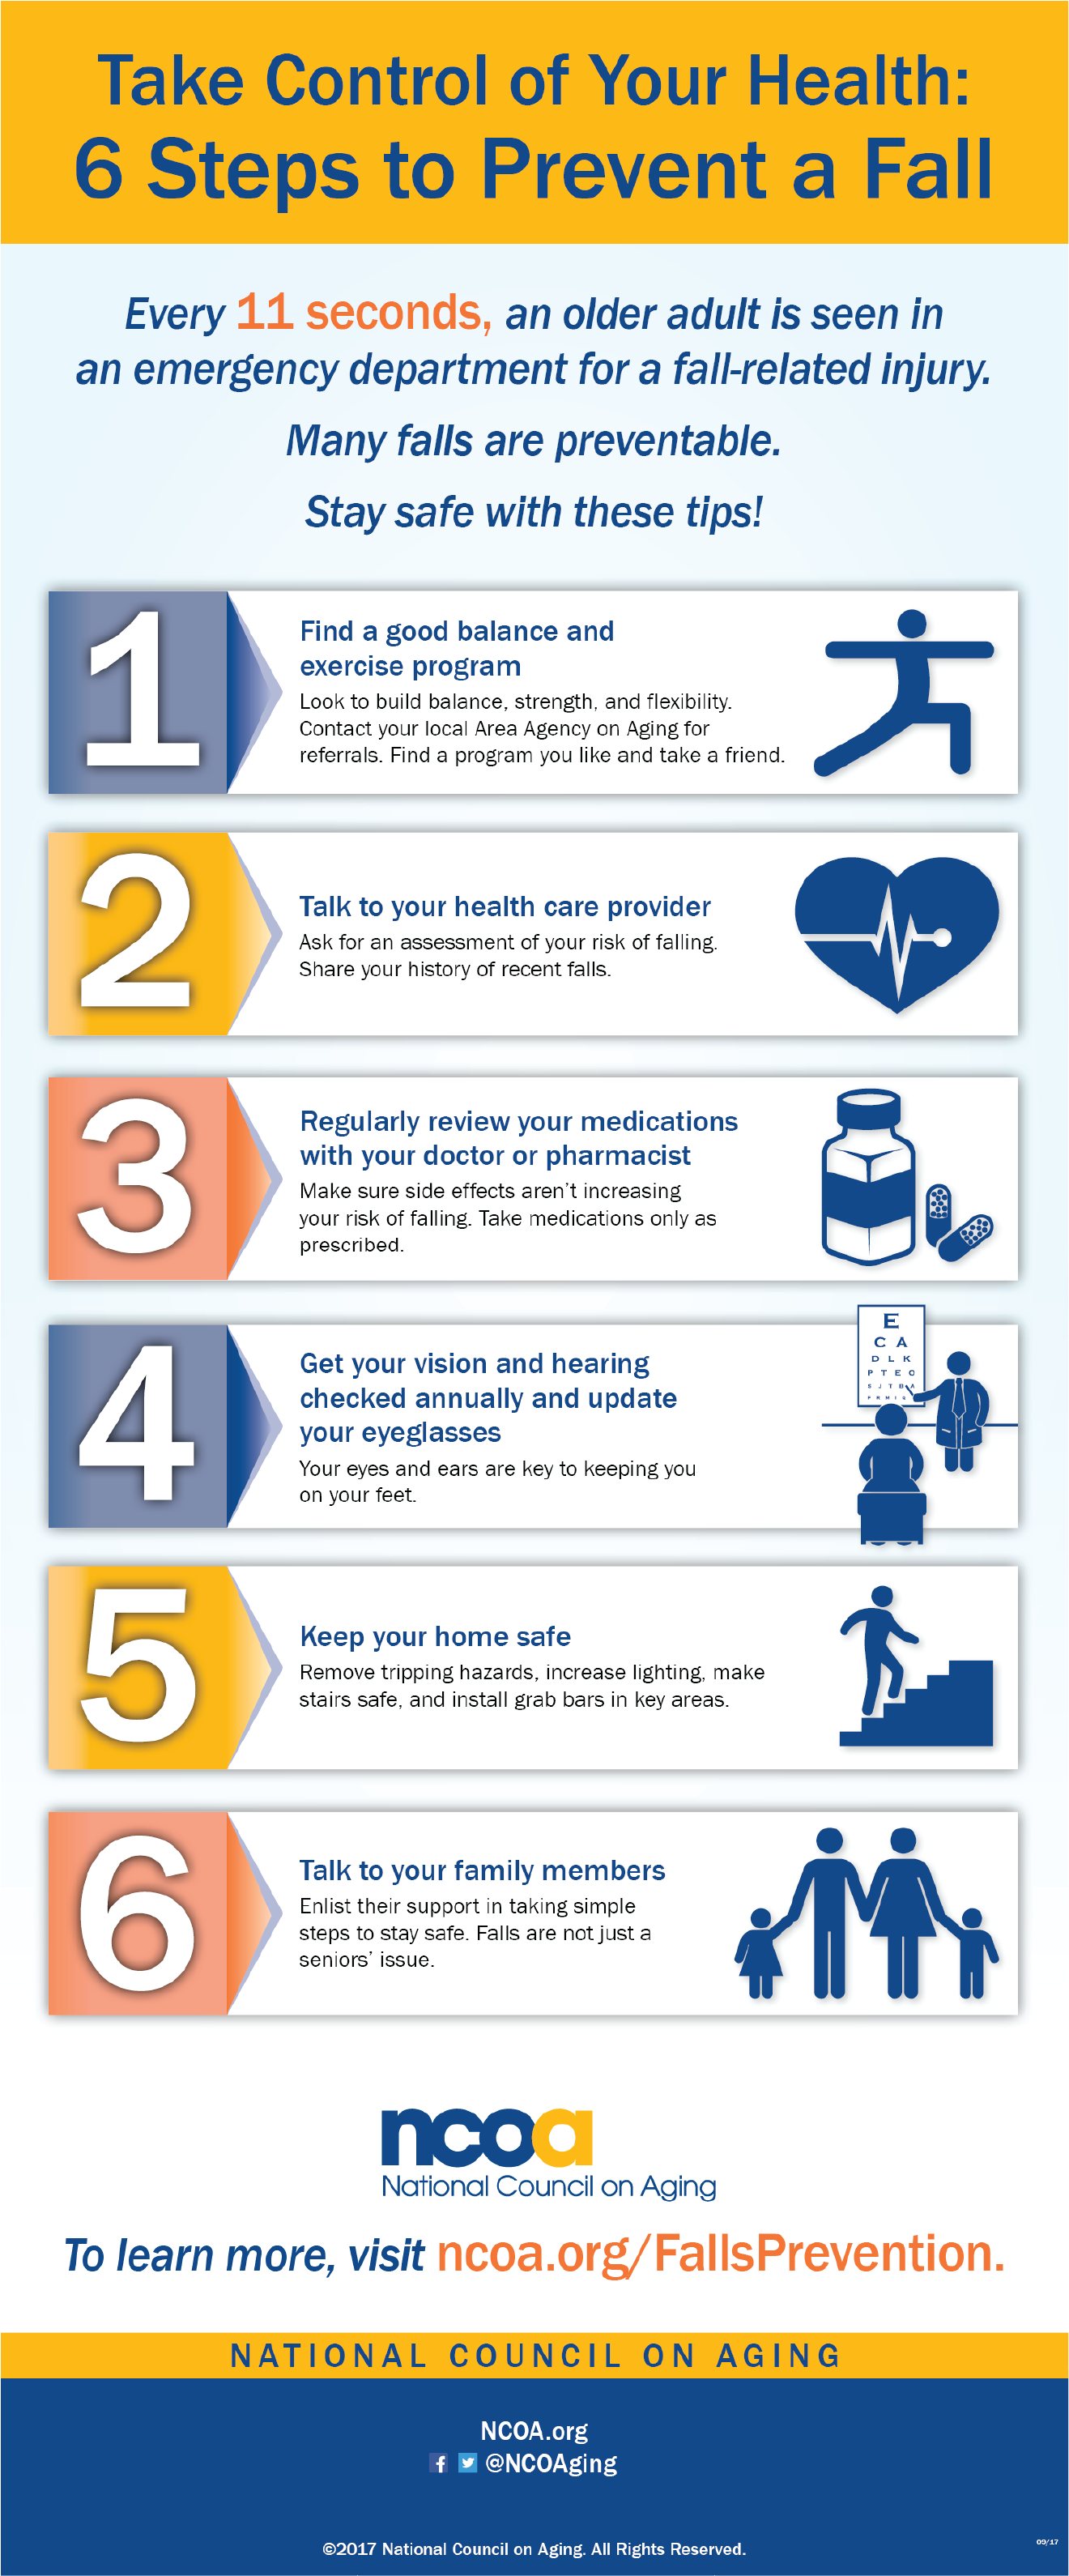 Fall Prevention Week